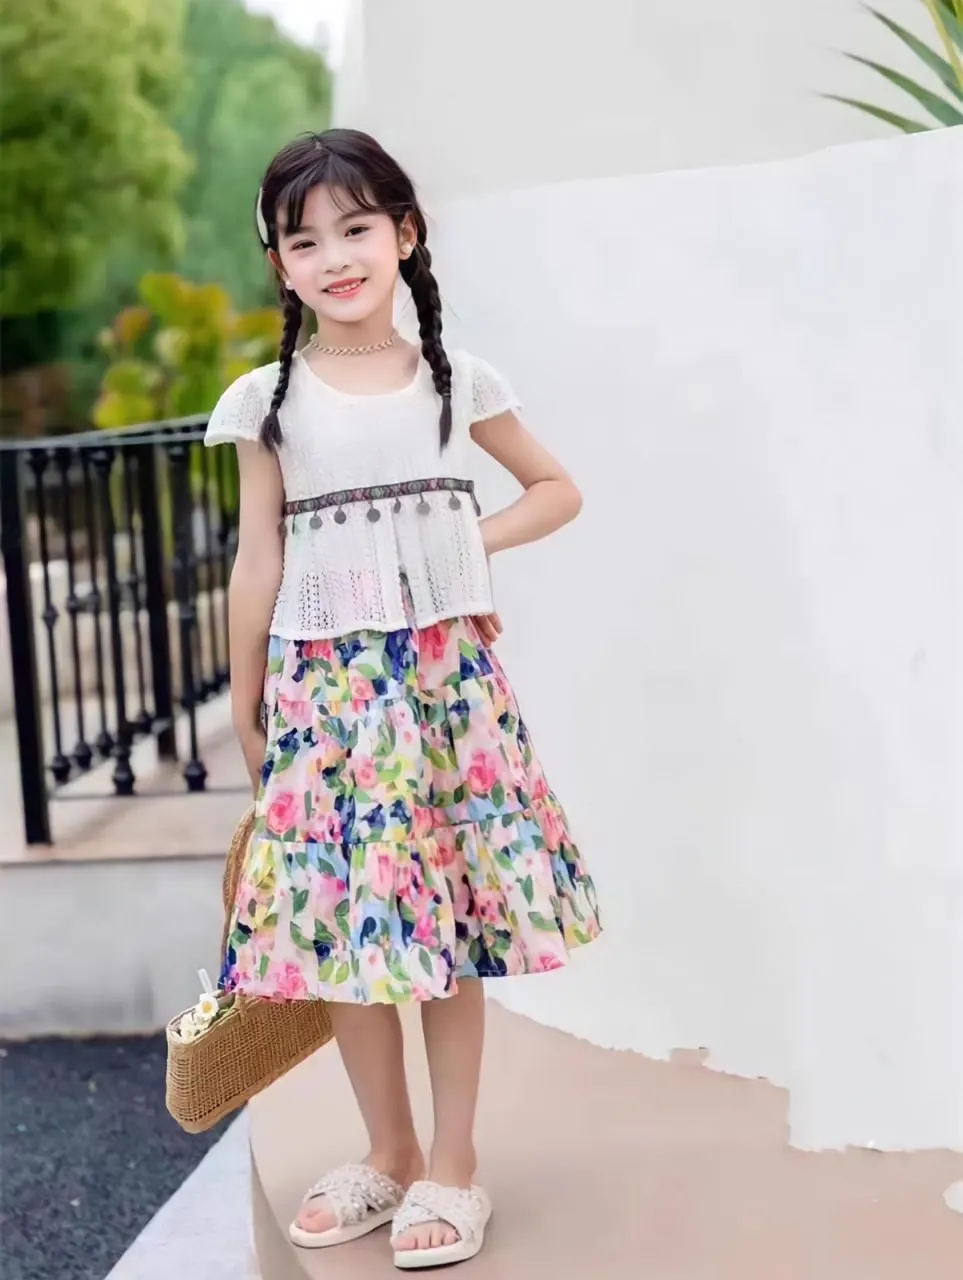 Hot selling girls dress summer dress western style skirt dress girls skirt fashion baby 3-8 years old material cotton material